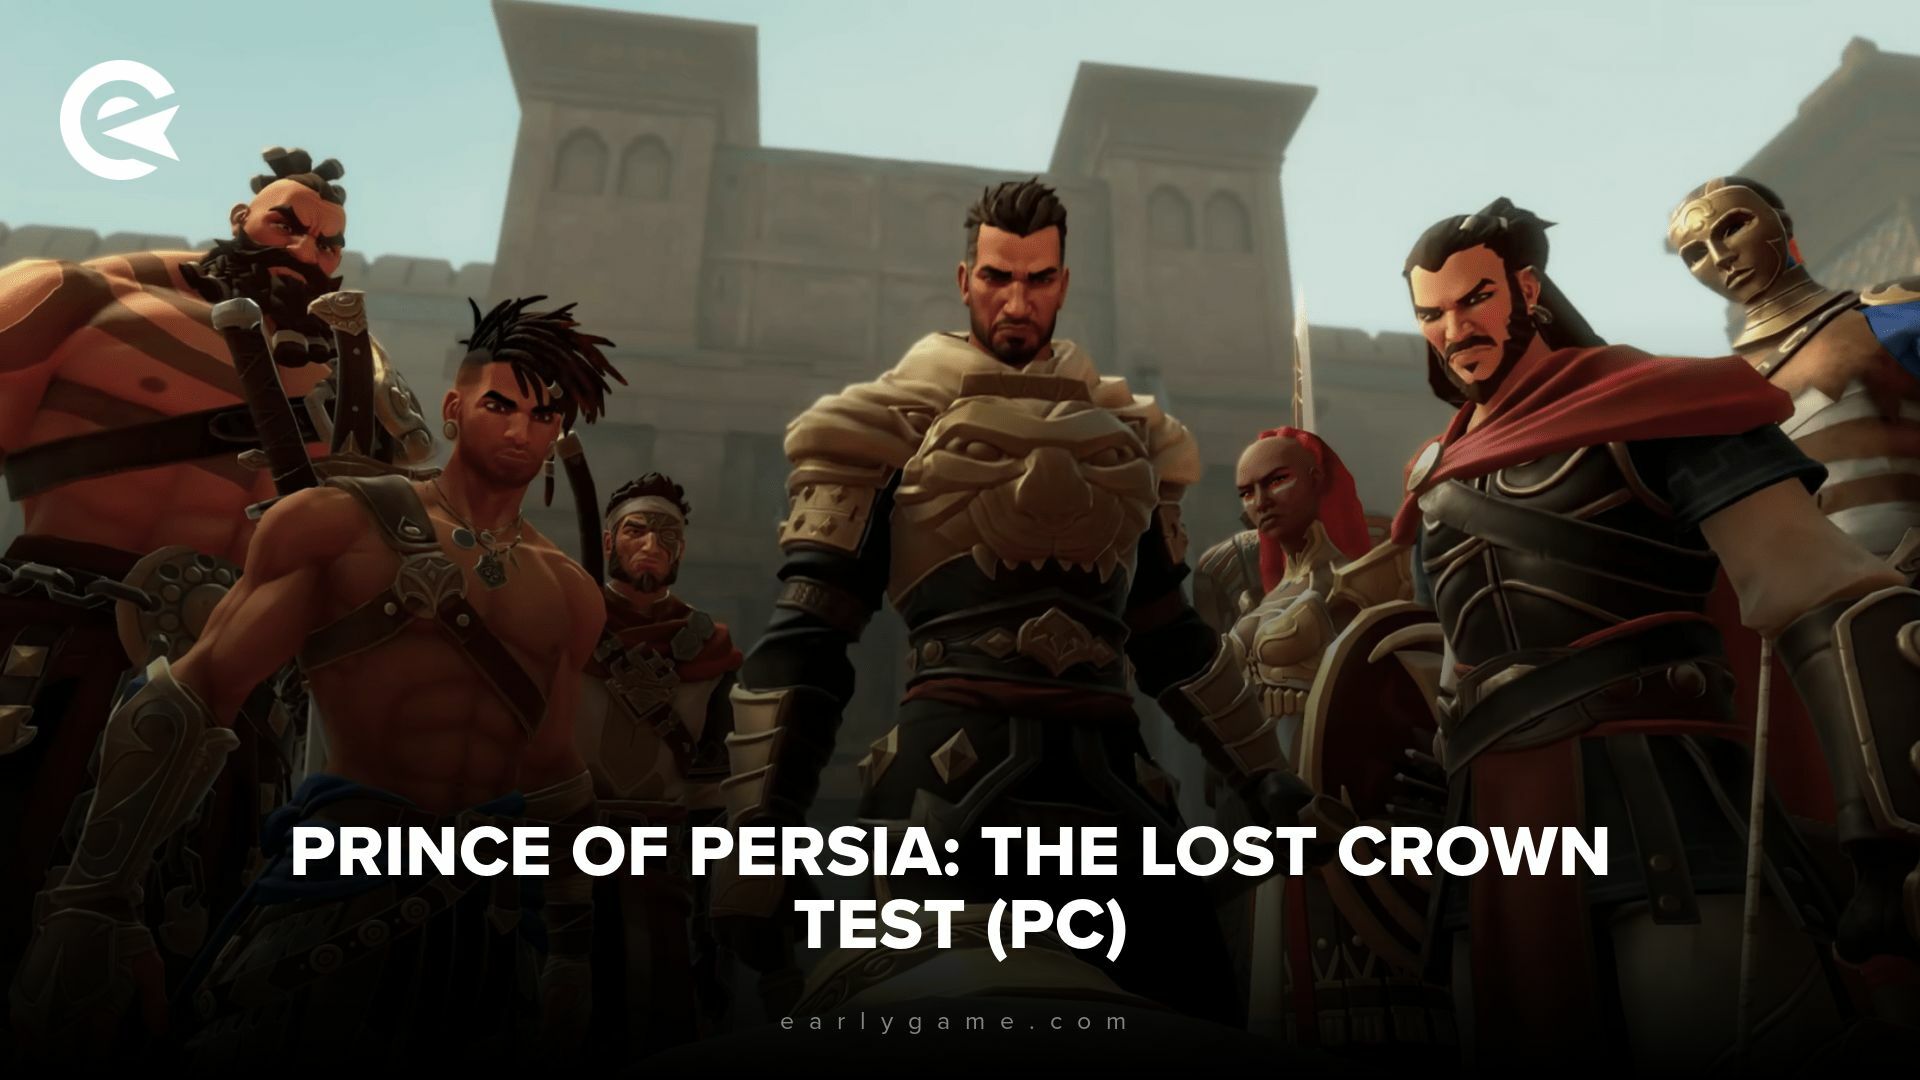 Prince of Persia The Lost Crown Test PC